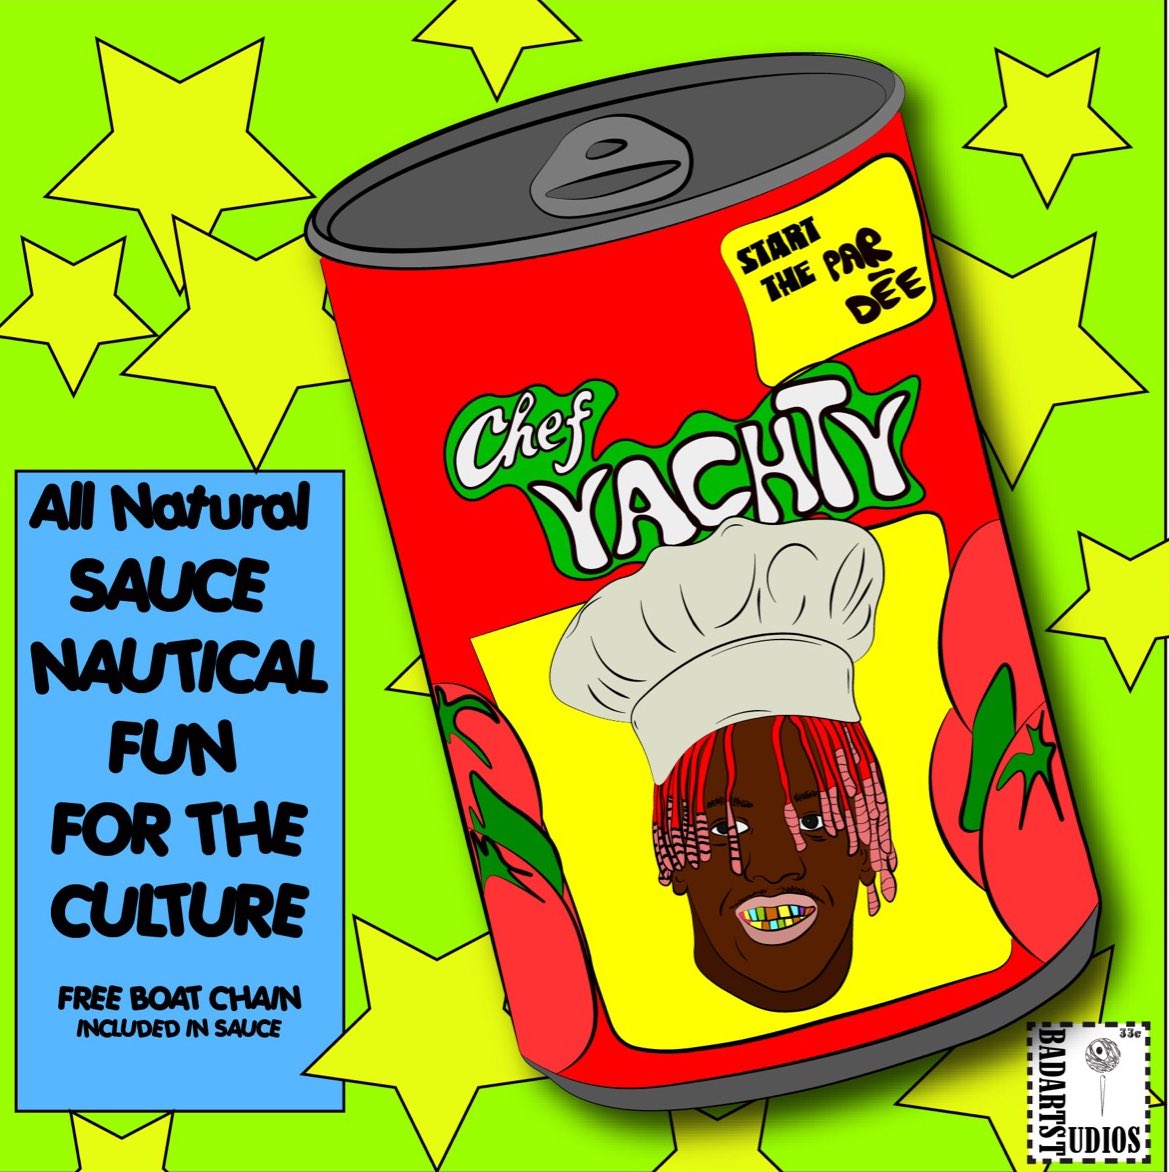 Congrats to @lilyachty and @donnyosmond on remaking the @realchefboyardee song. We made some art for the celebration. Follow @badartstudios702 on iG